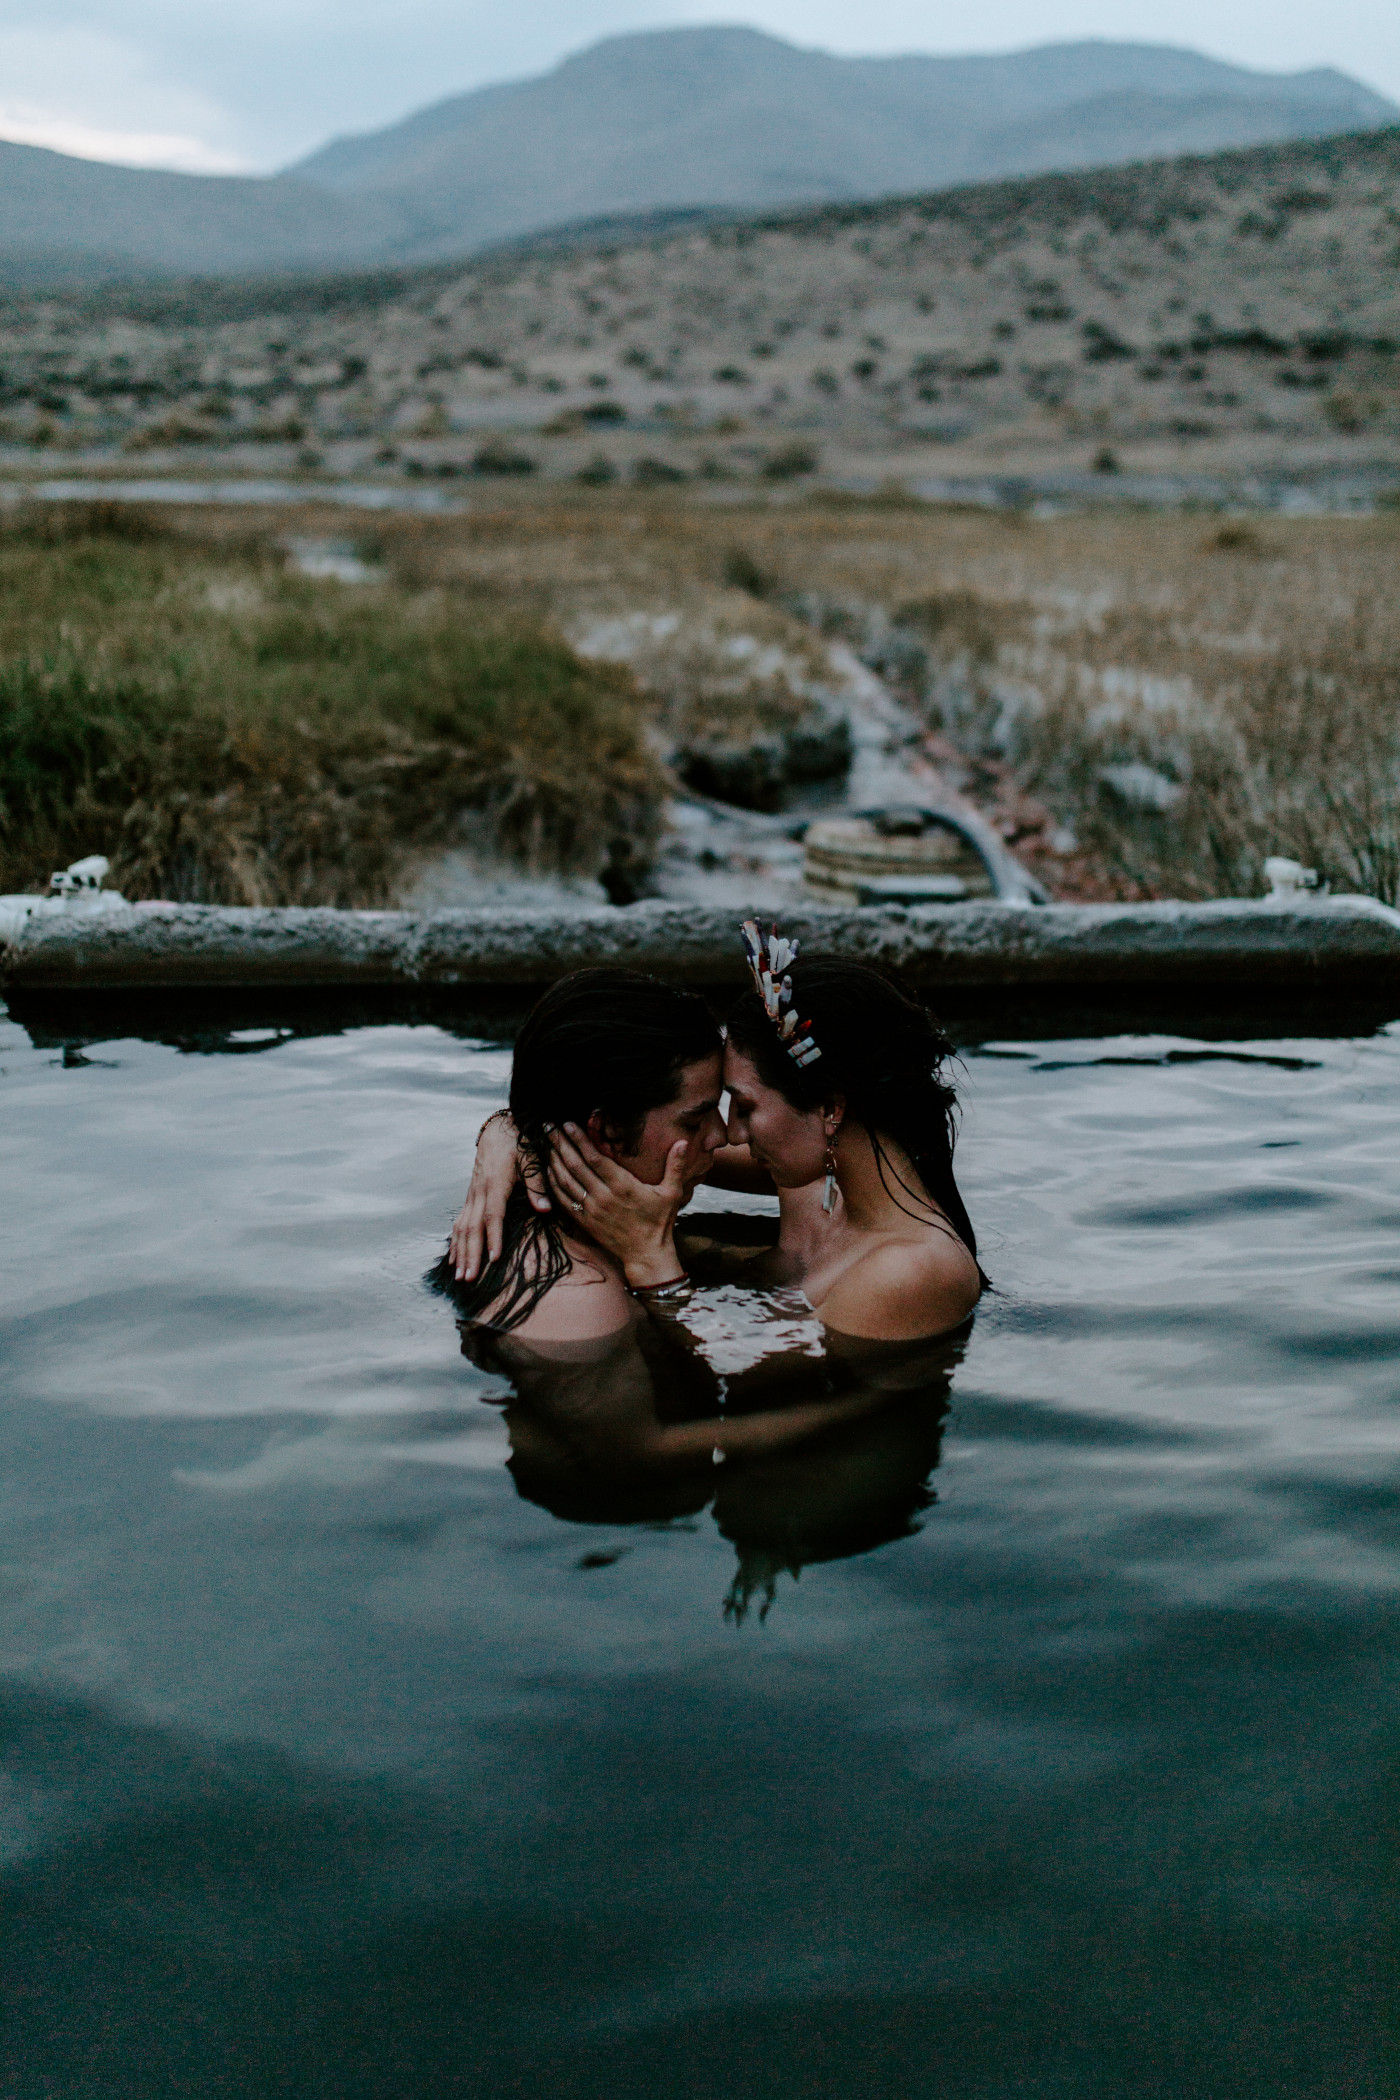 Emerald and Cameron hold each other close in the hot springs at Alvord Desert.